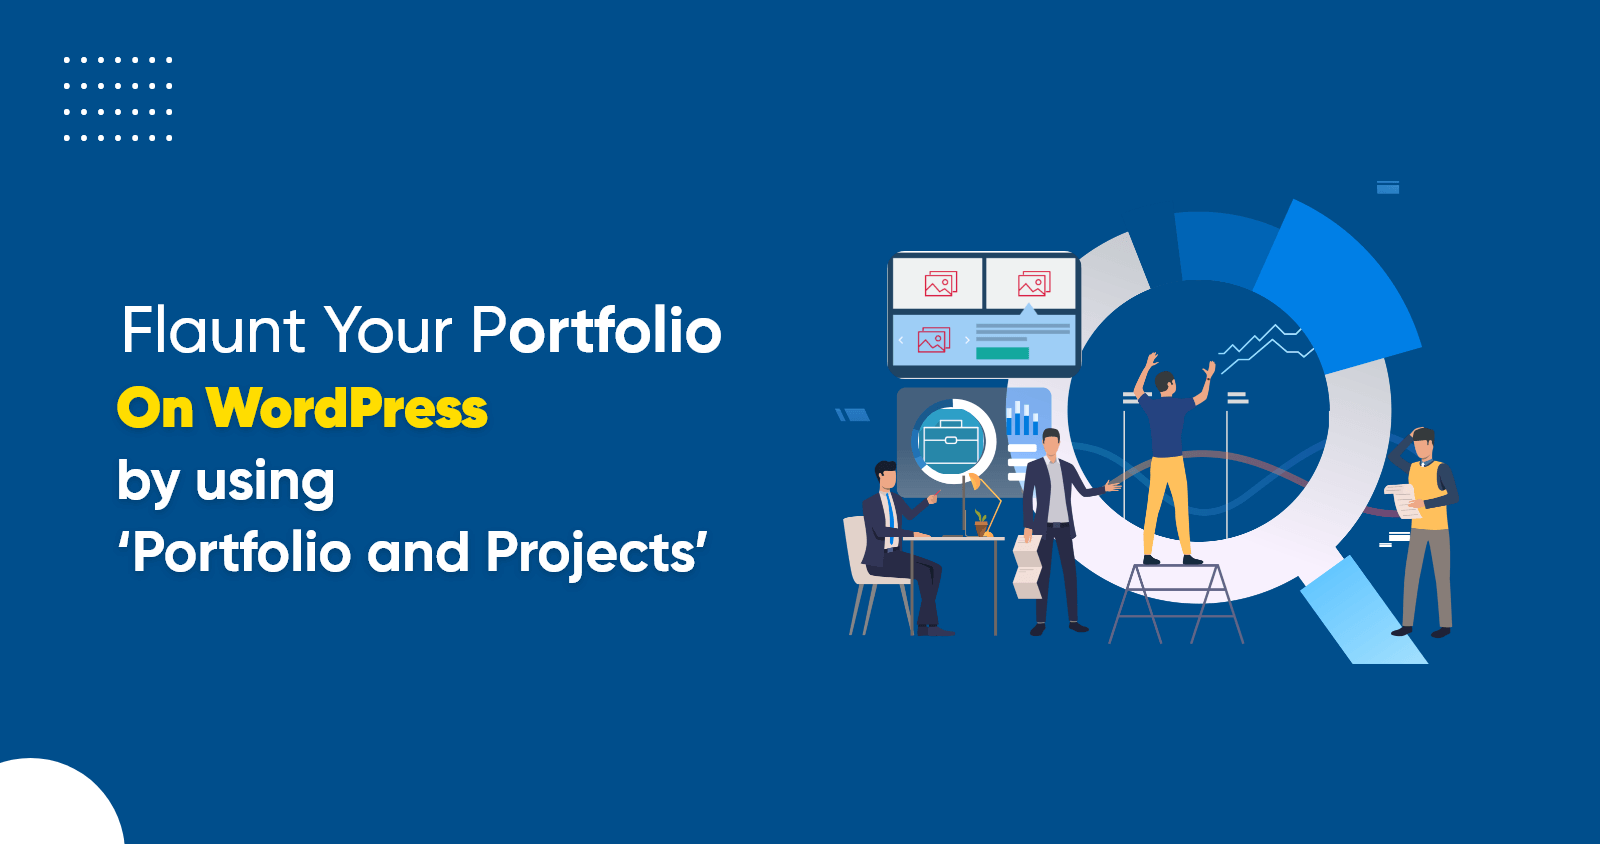 Flaunt Your portfolio on WordPress by using ‘Portfolio and Projects’